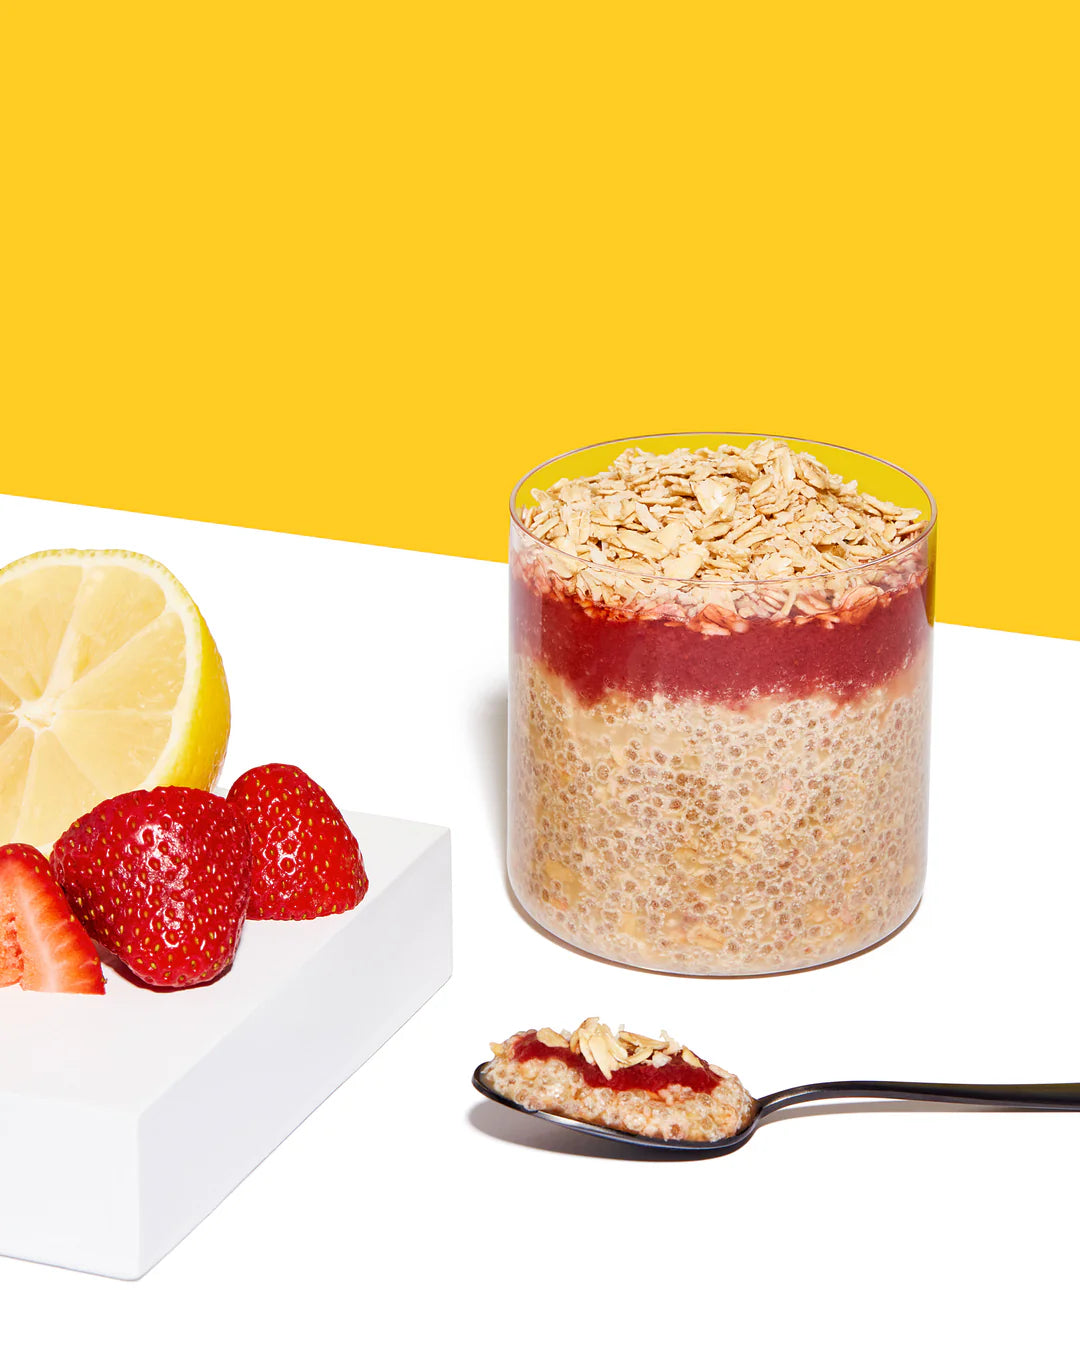 Layered chia pudding with strawberry puree and oats, accompanied by fresh strawberries and a lemon slice.